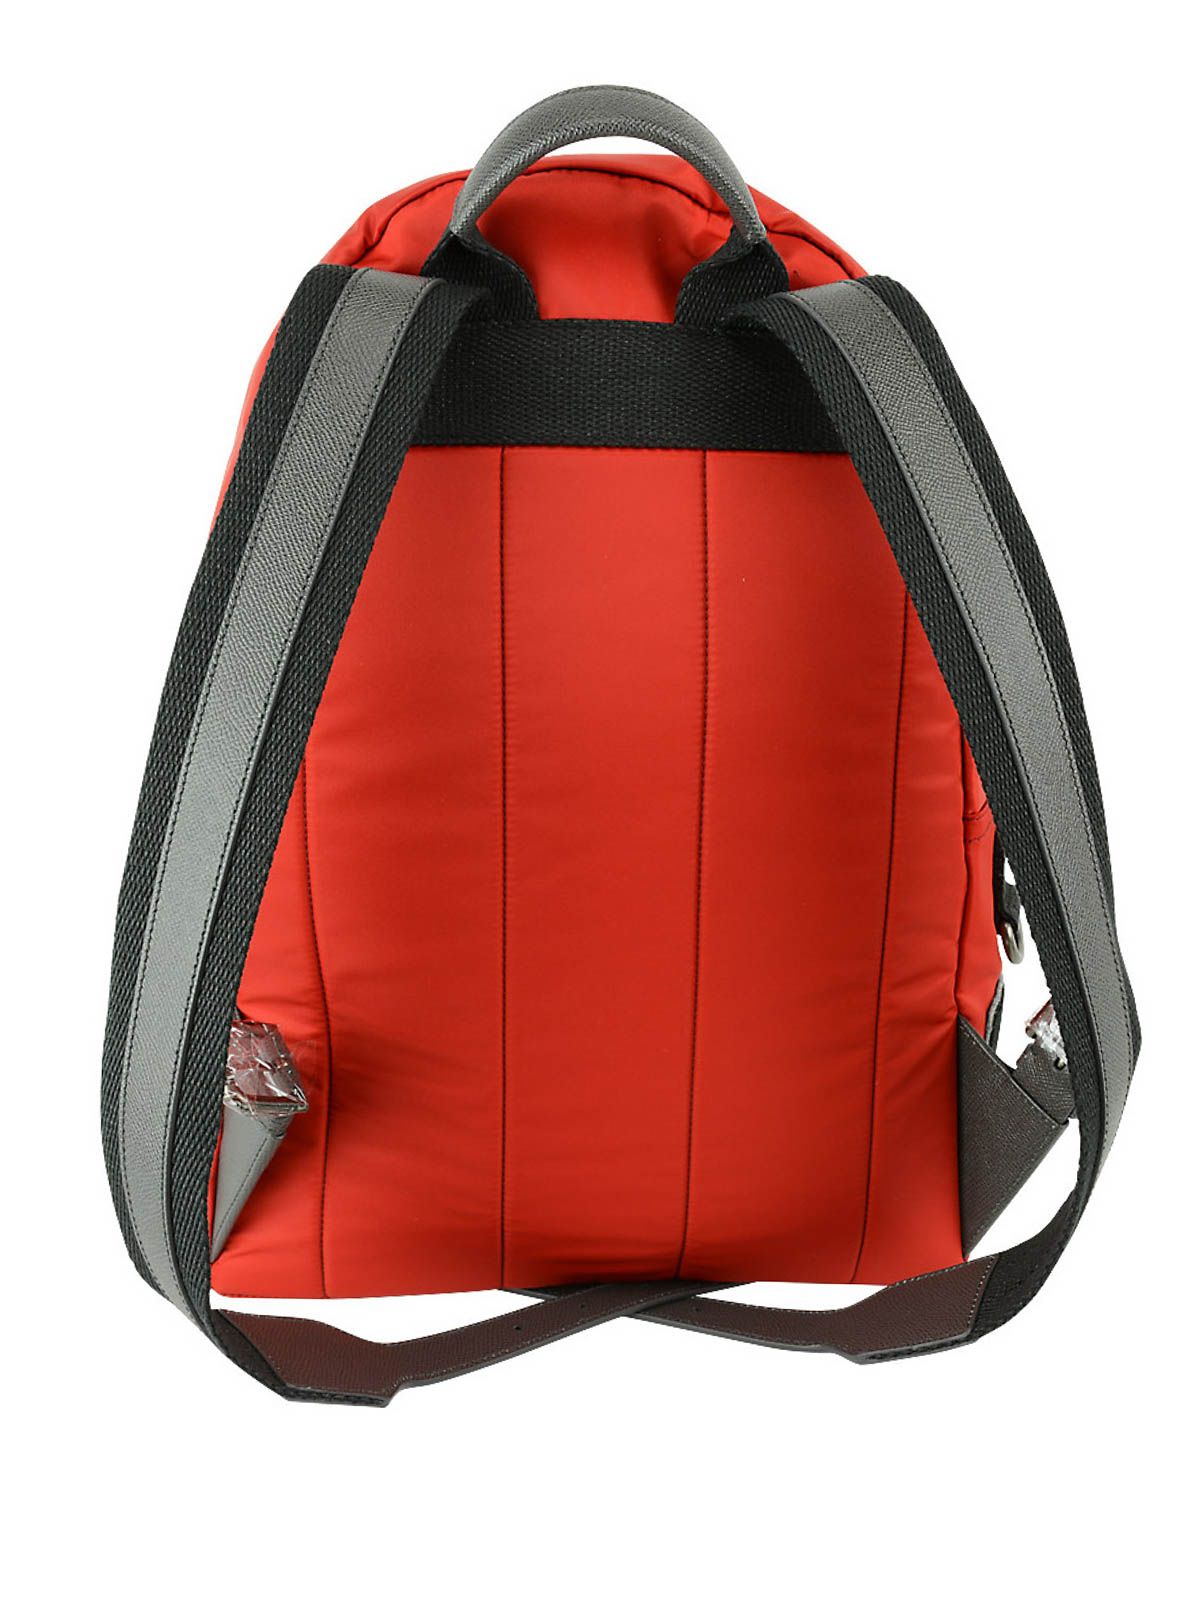 Chic Red Backpack with Leather Accents